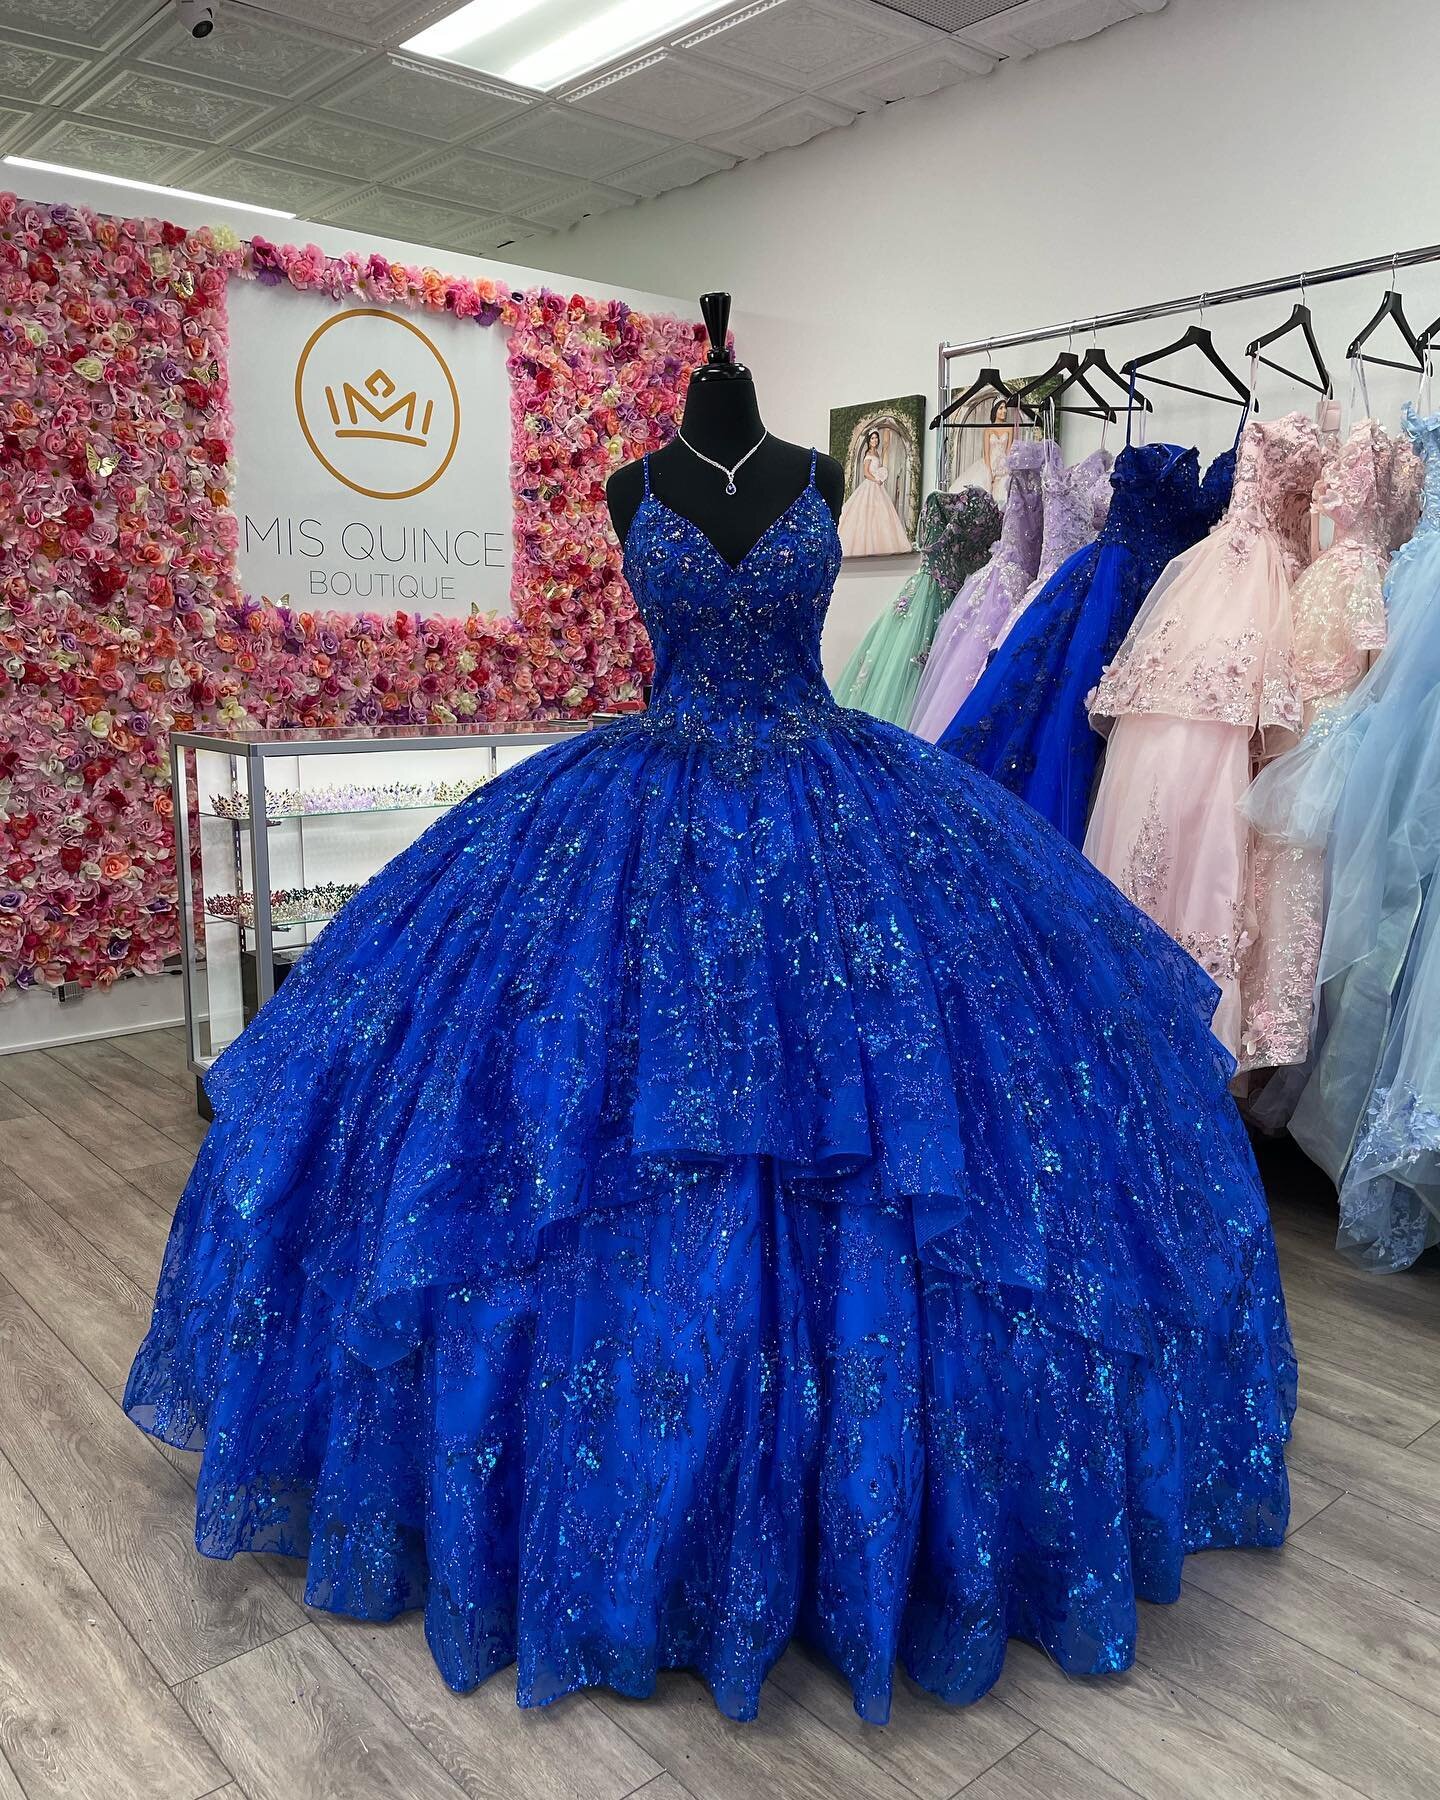 ✨New in store✨
.
.
.
.
.
.
#misquincea&ntilde;os #mis15a&ntilde;os #misquince #morileeofficial